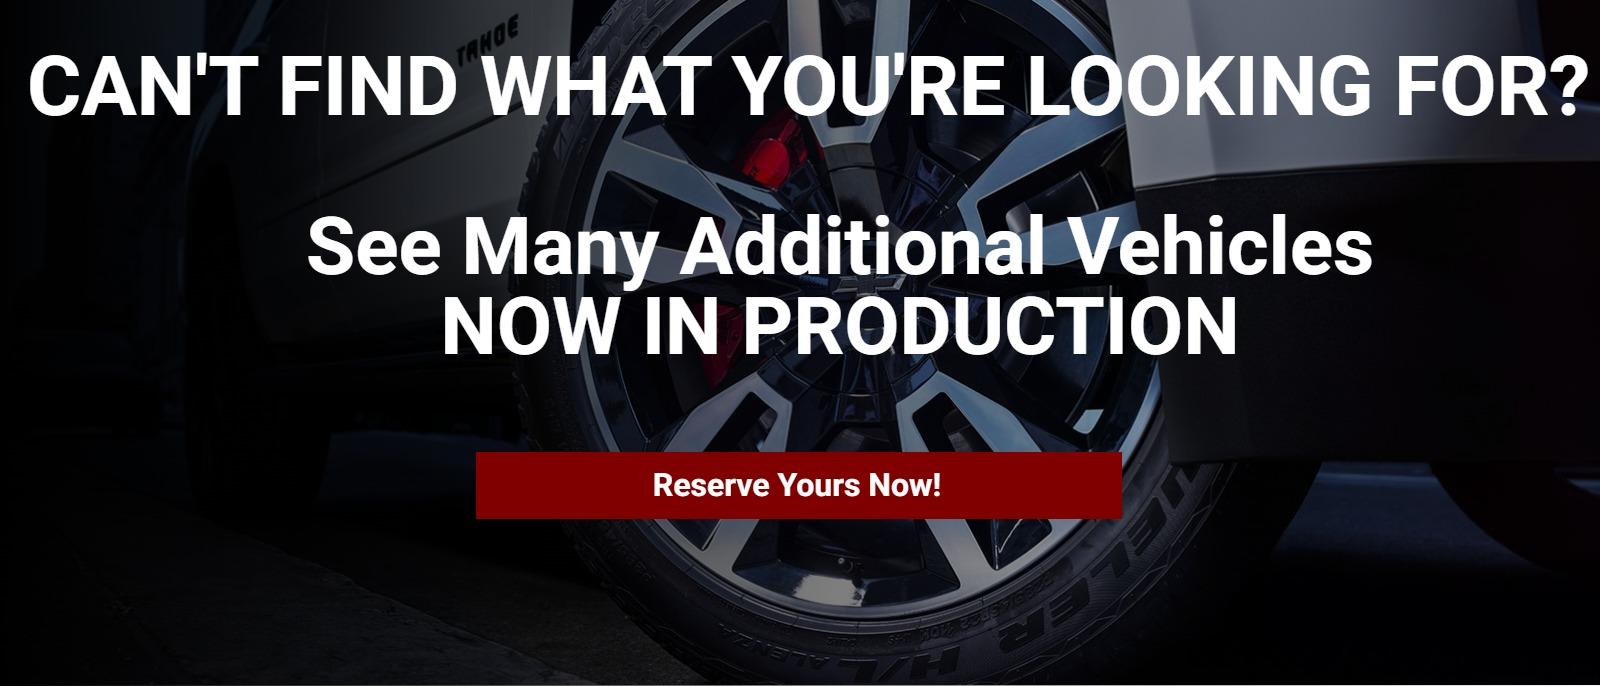 Can't find what you're looking for? See Many Additional Vehicles, Now In Production! Reserve Yours Now